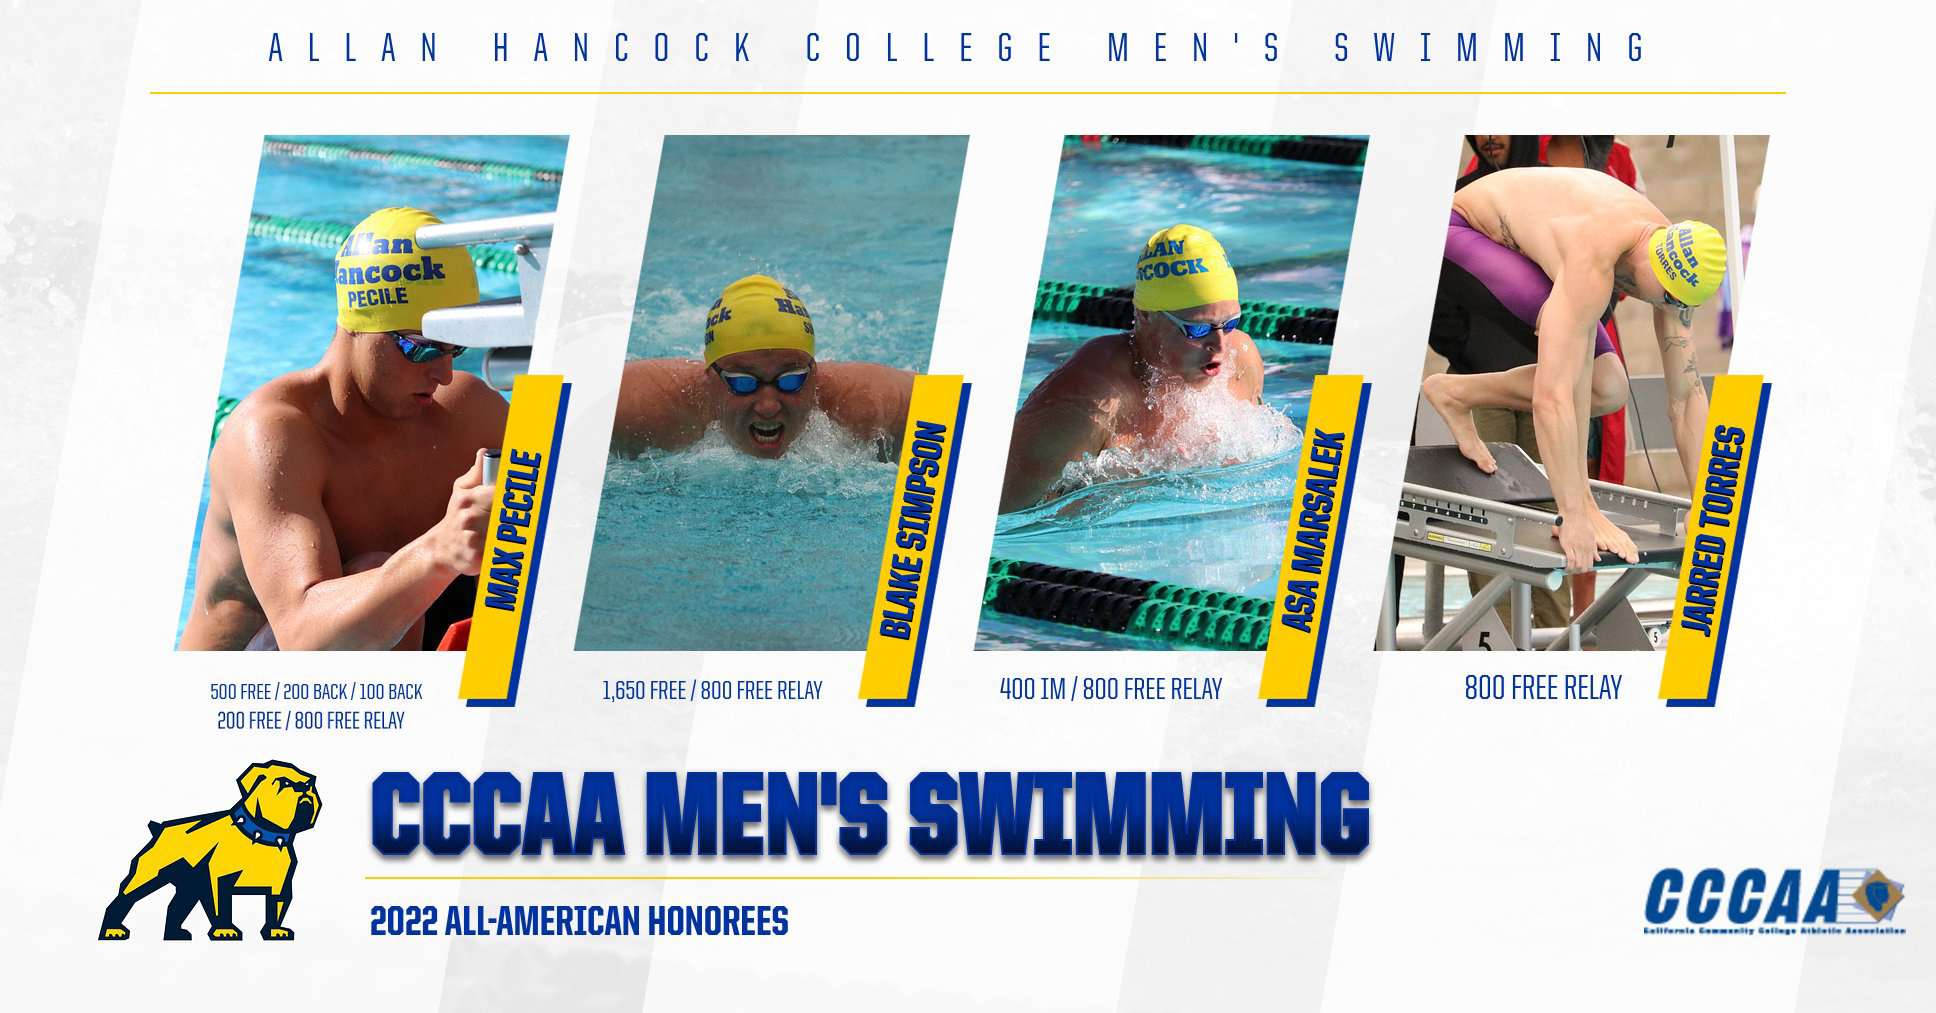 Three Individuals and One Relay Team Named to List of CCCAA All-American